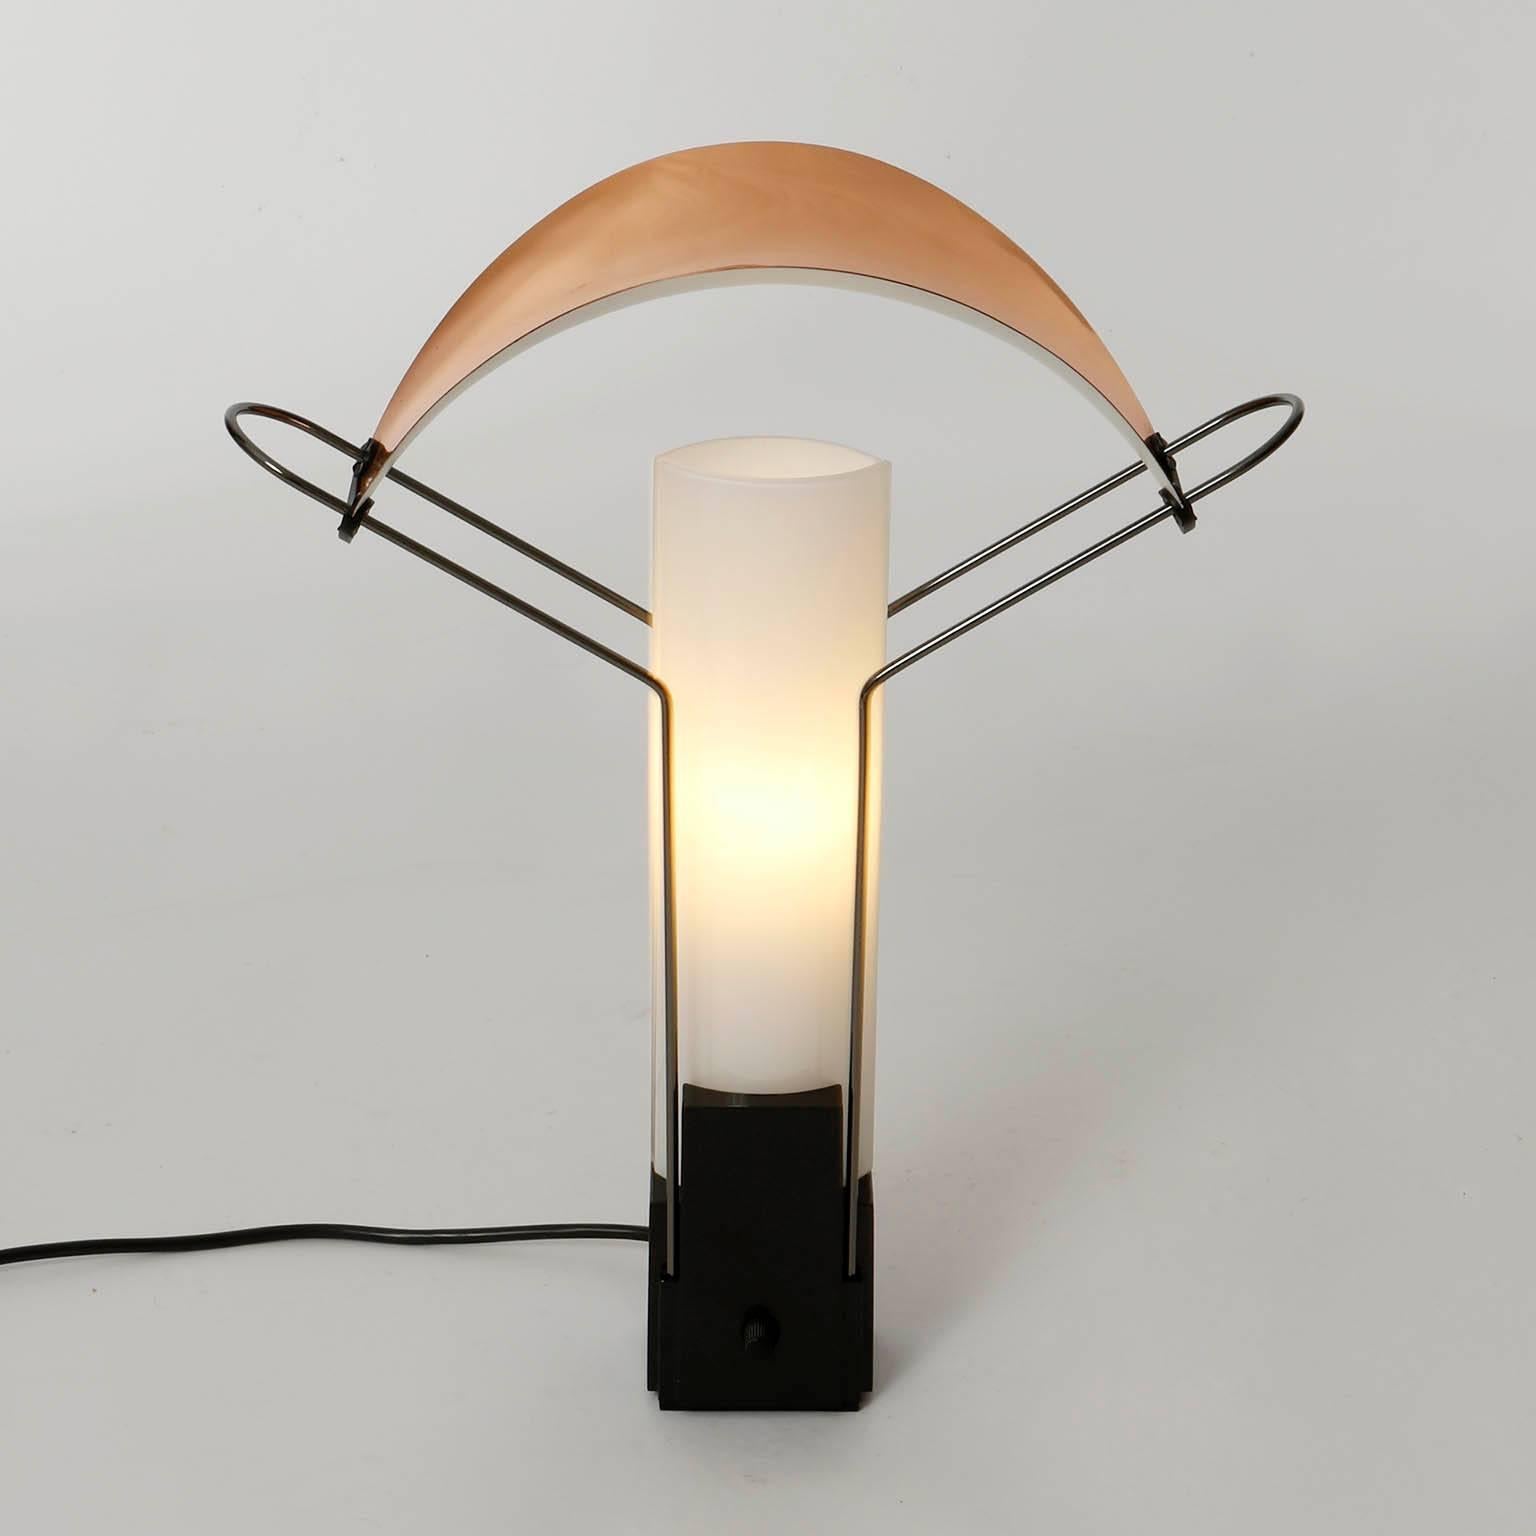 Mid-Century Modern Table Lamp 'Palio' by Arteluce, Copper Opal Glass, Italy, 1985